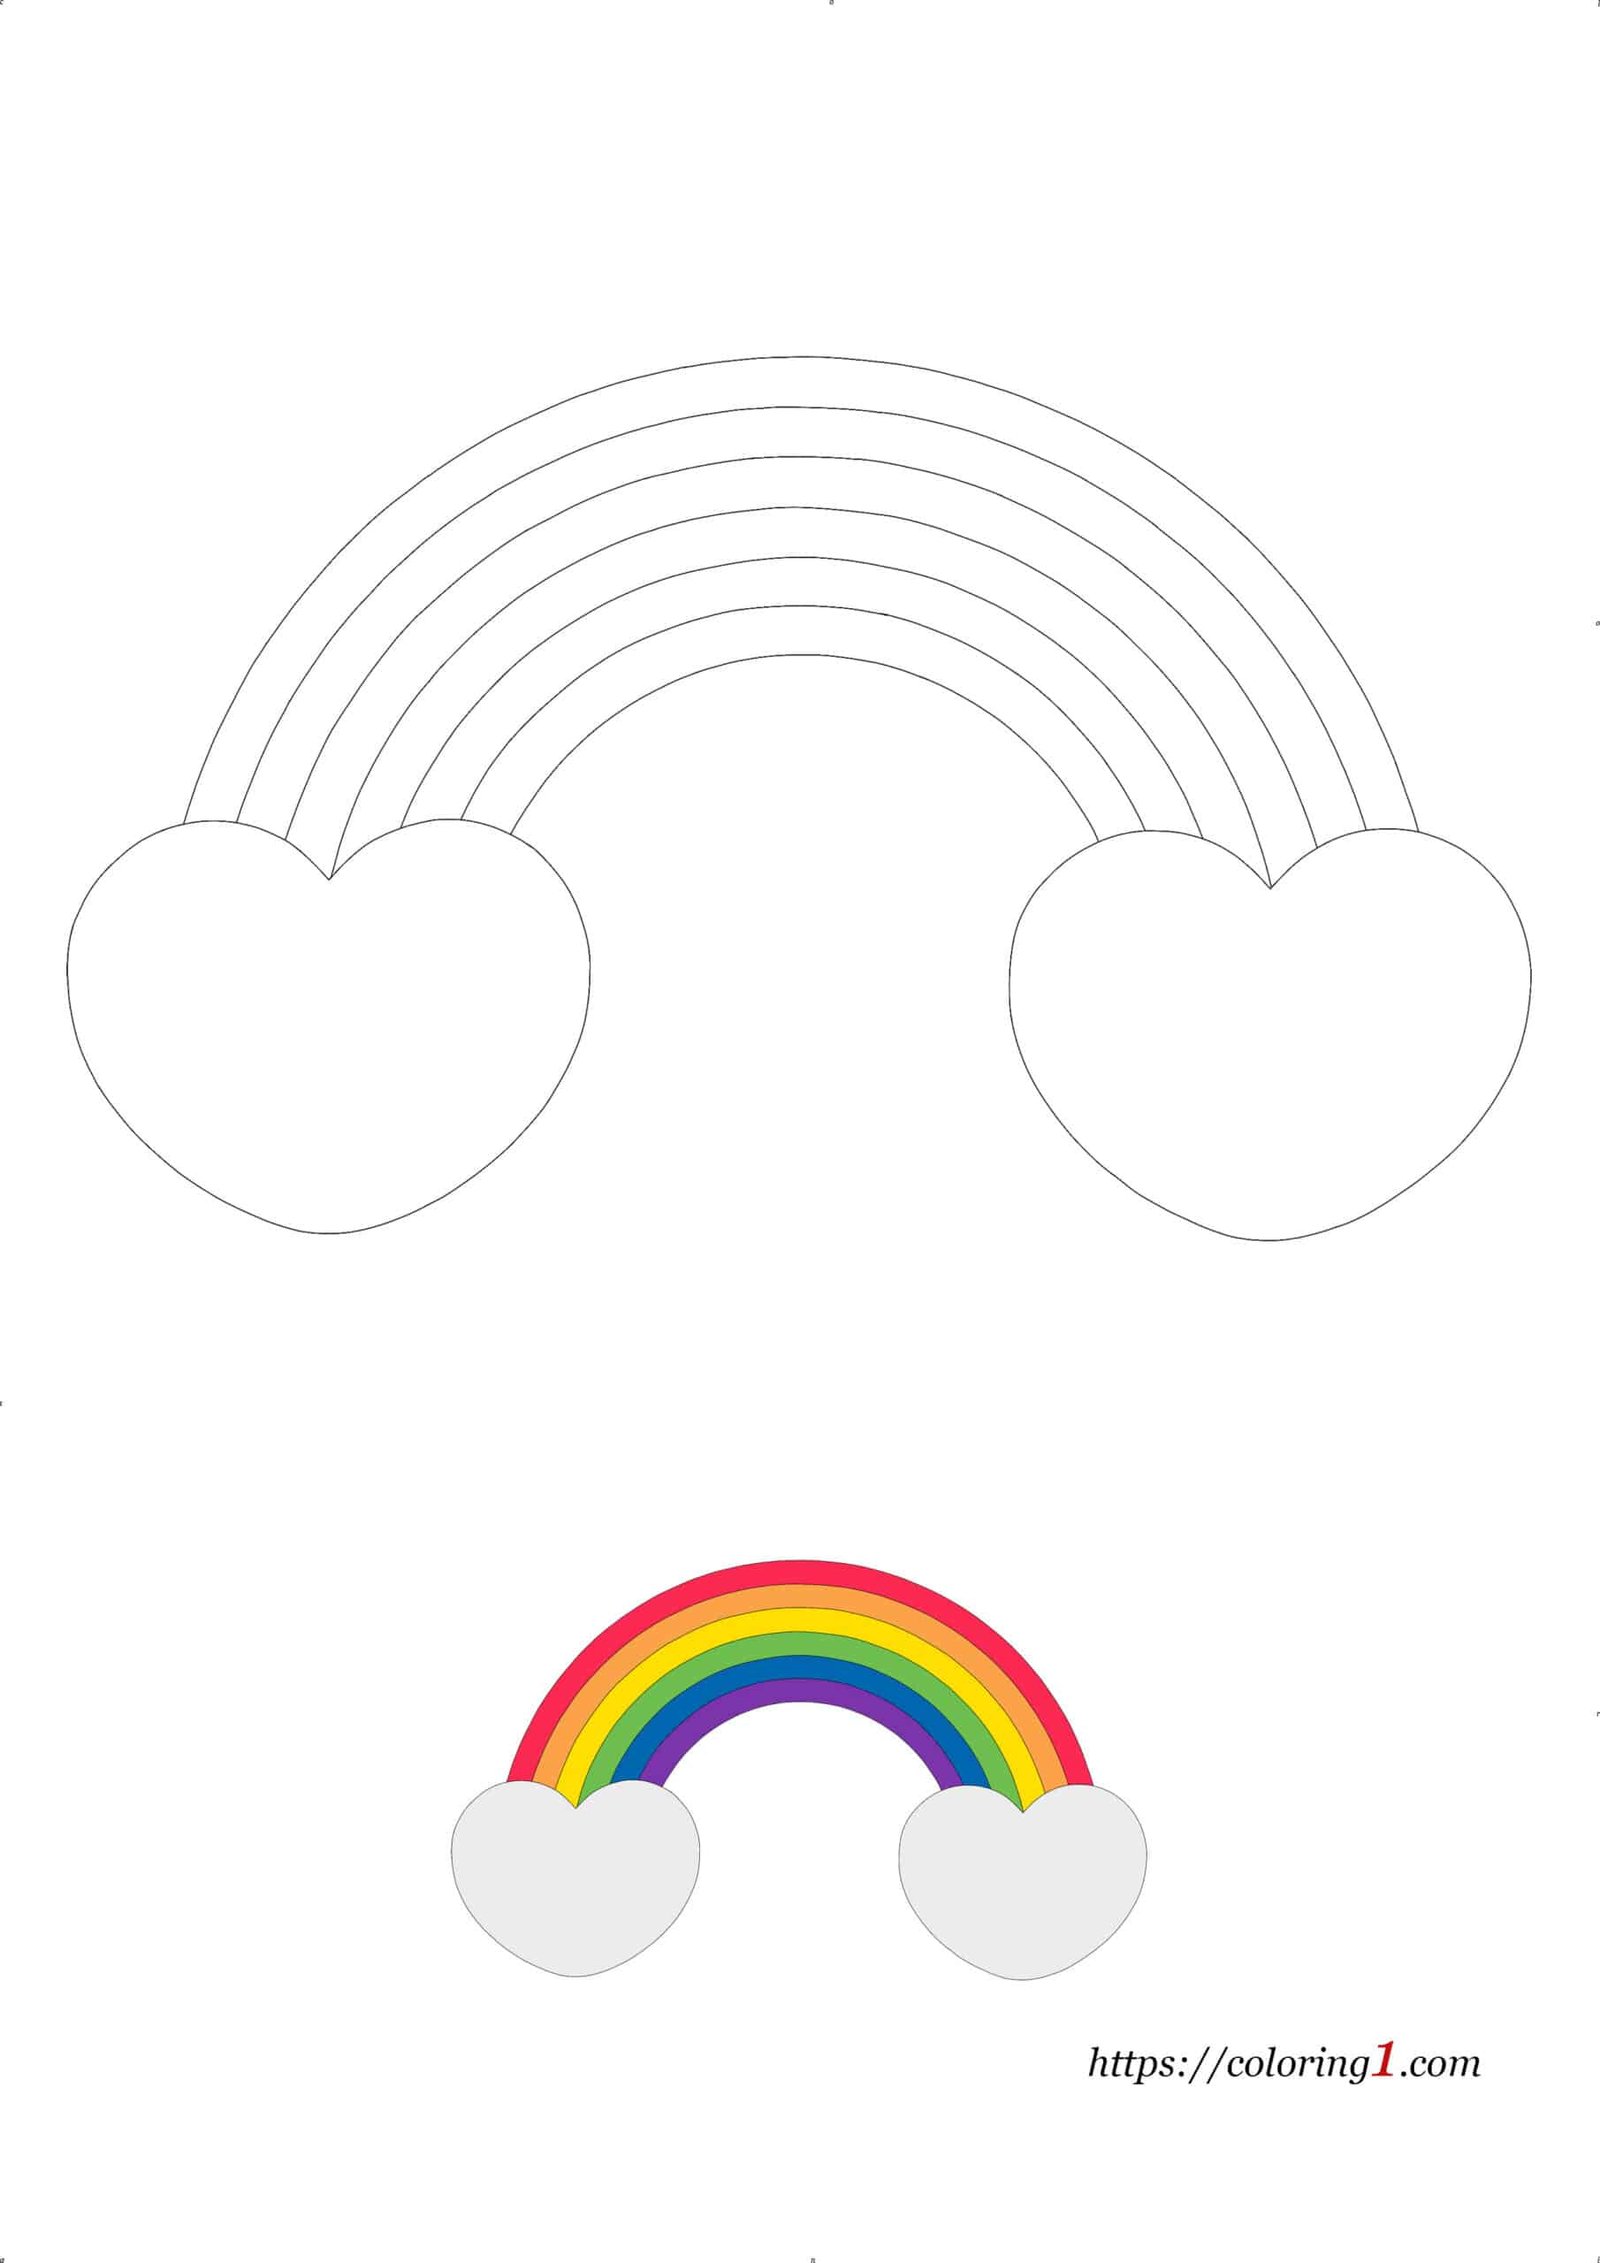 Rainbow and Cloud Hearts coloring page for boys and girls